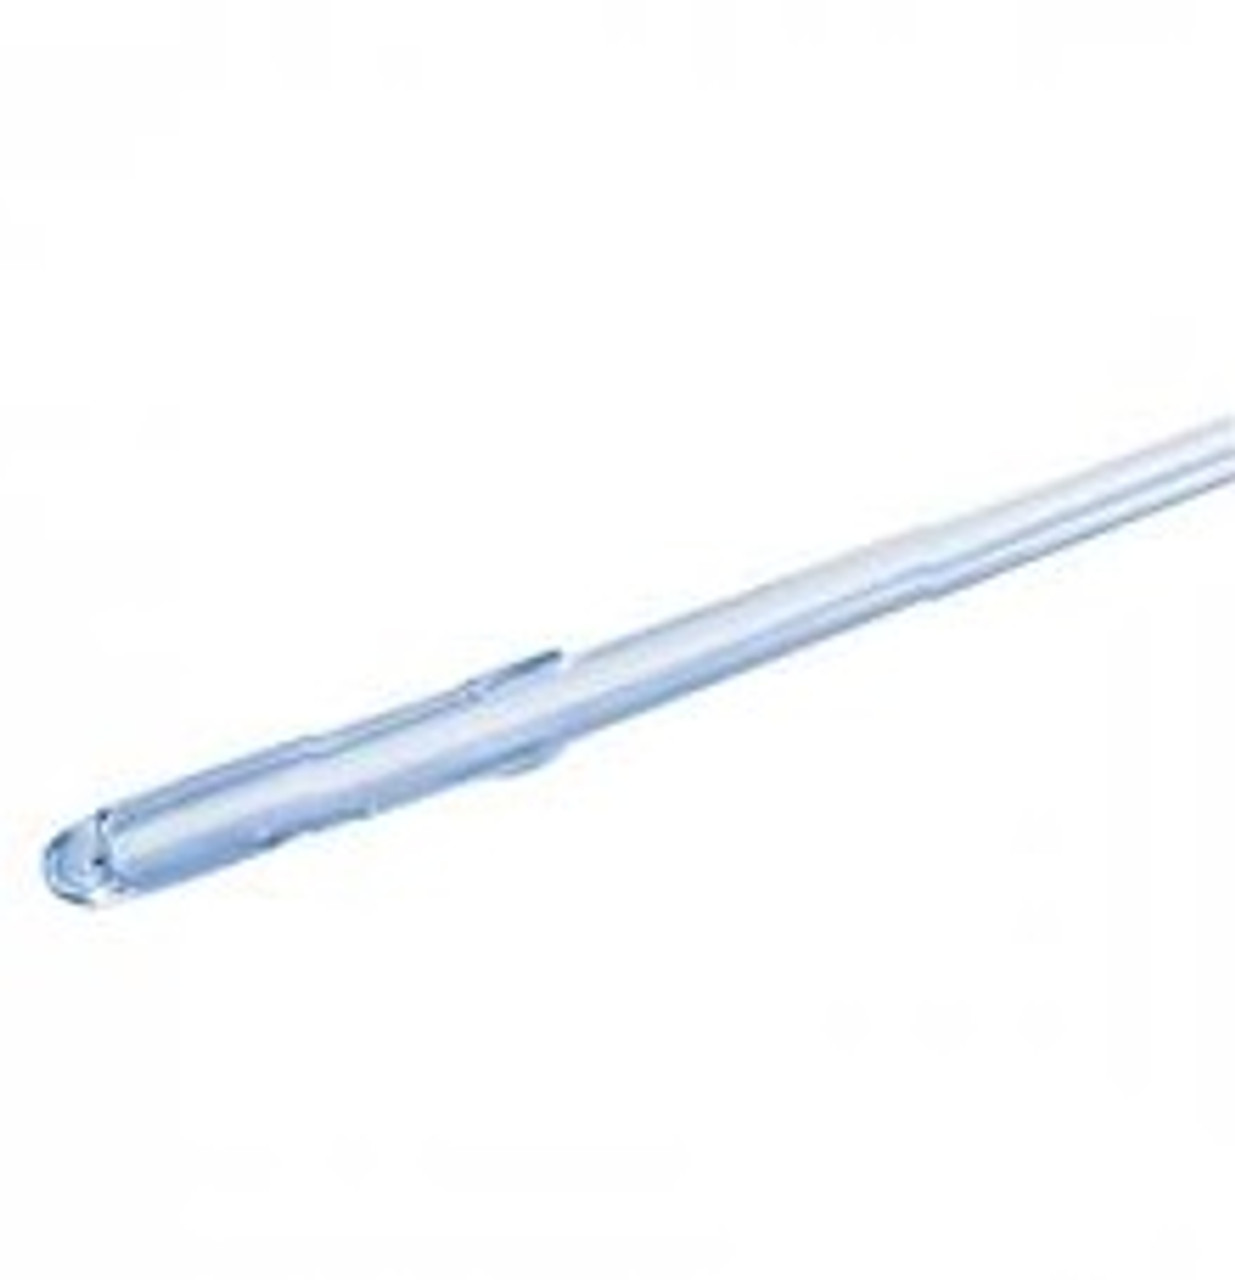 ConvaTec 501006 GENTLECATH MALE Urinary Catheter, 18FR, PVC, STRAIGHT TIP BX/100